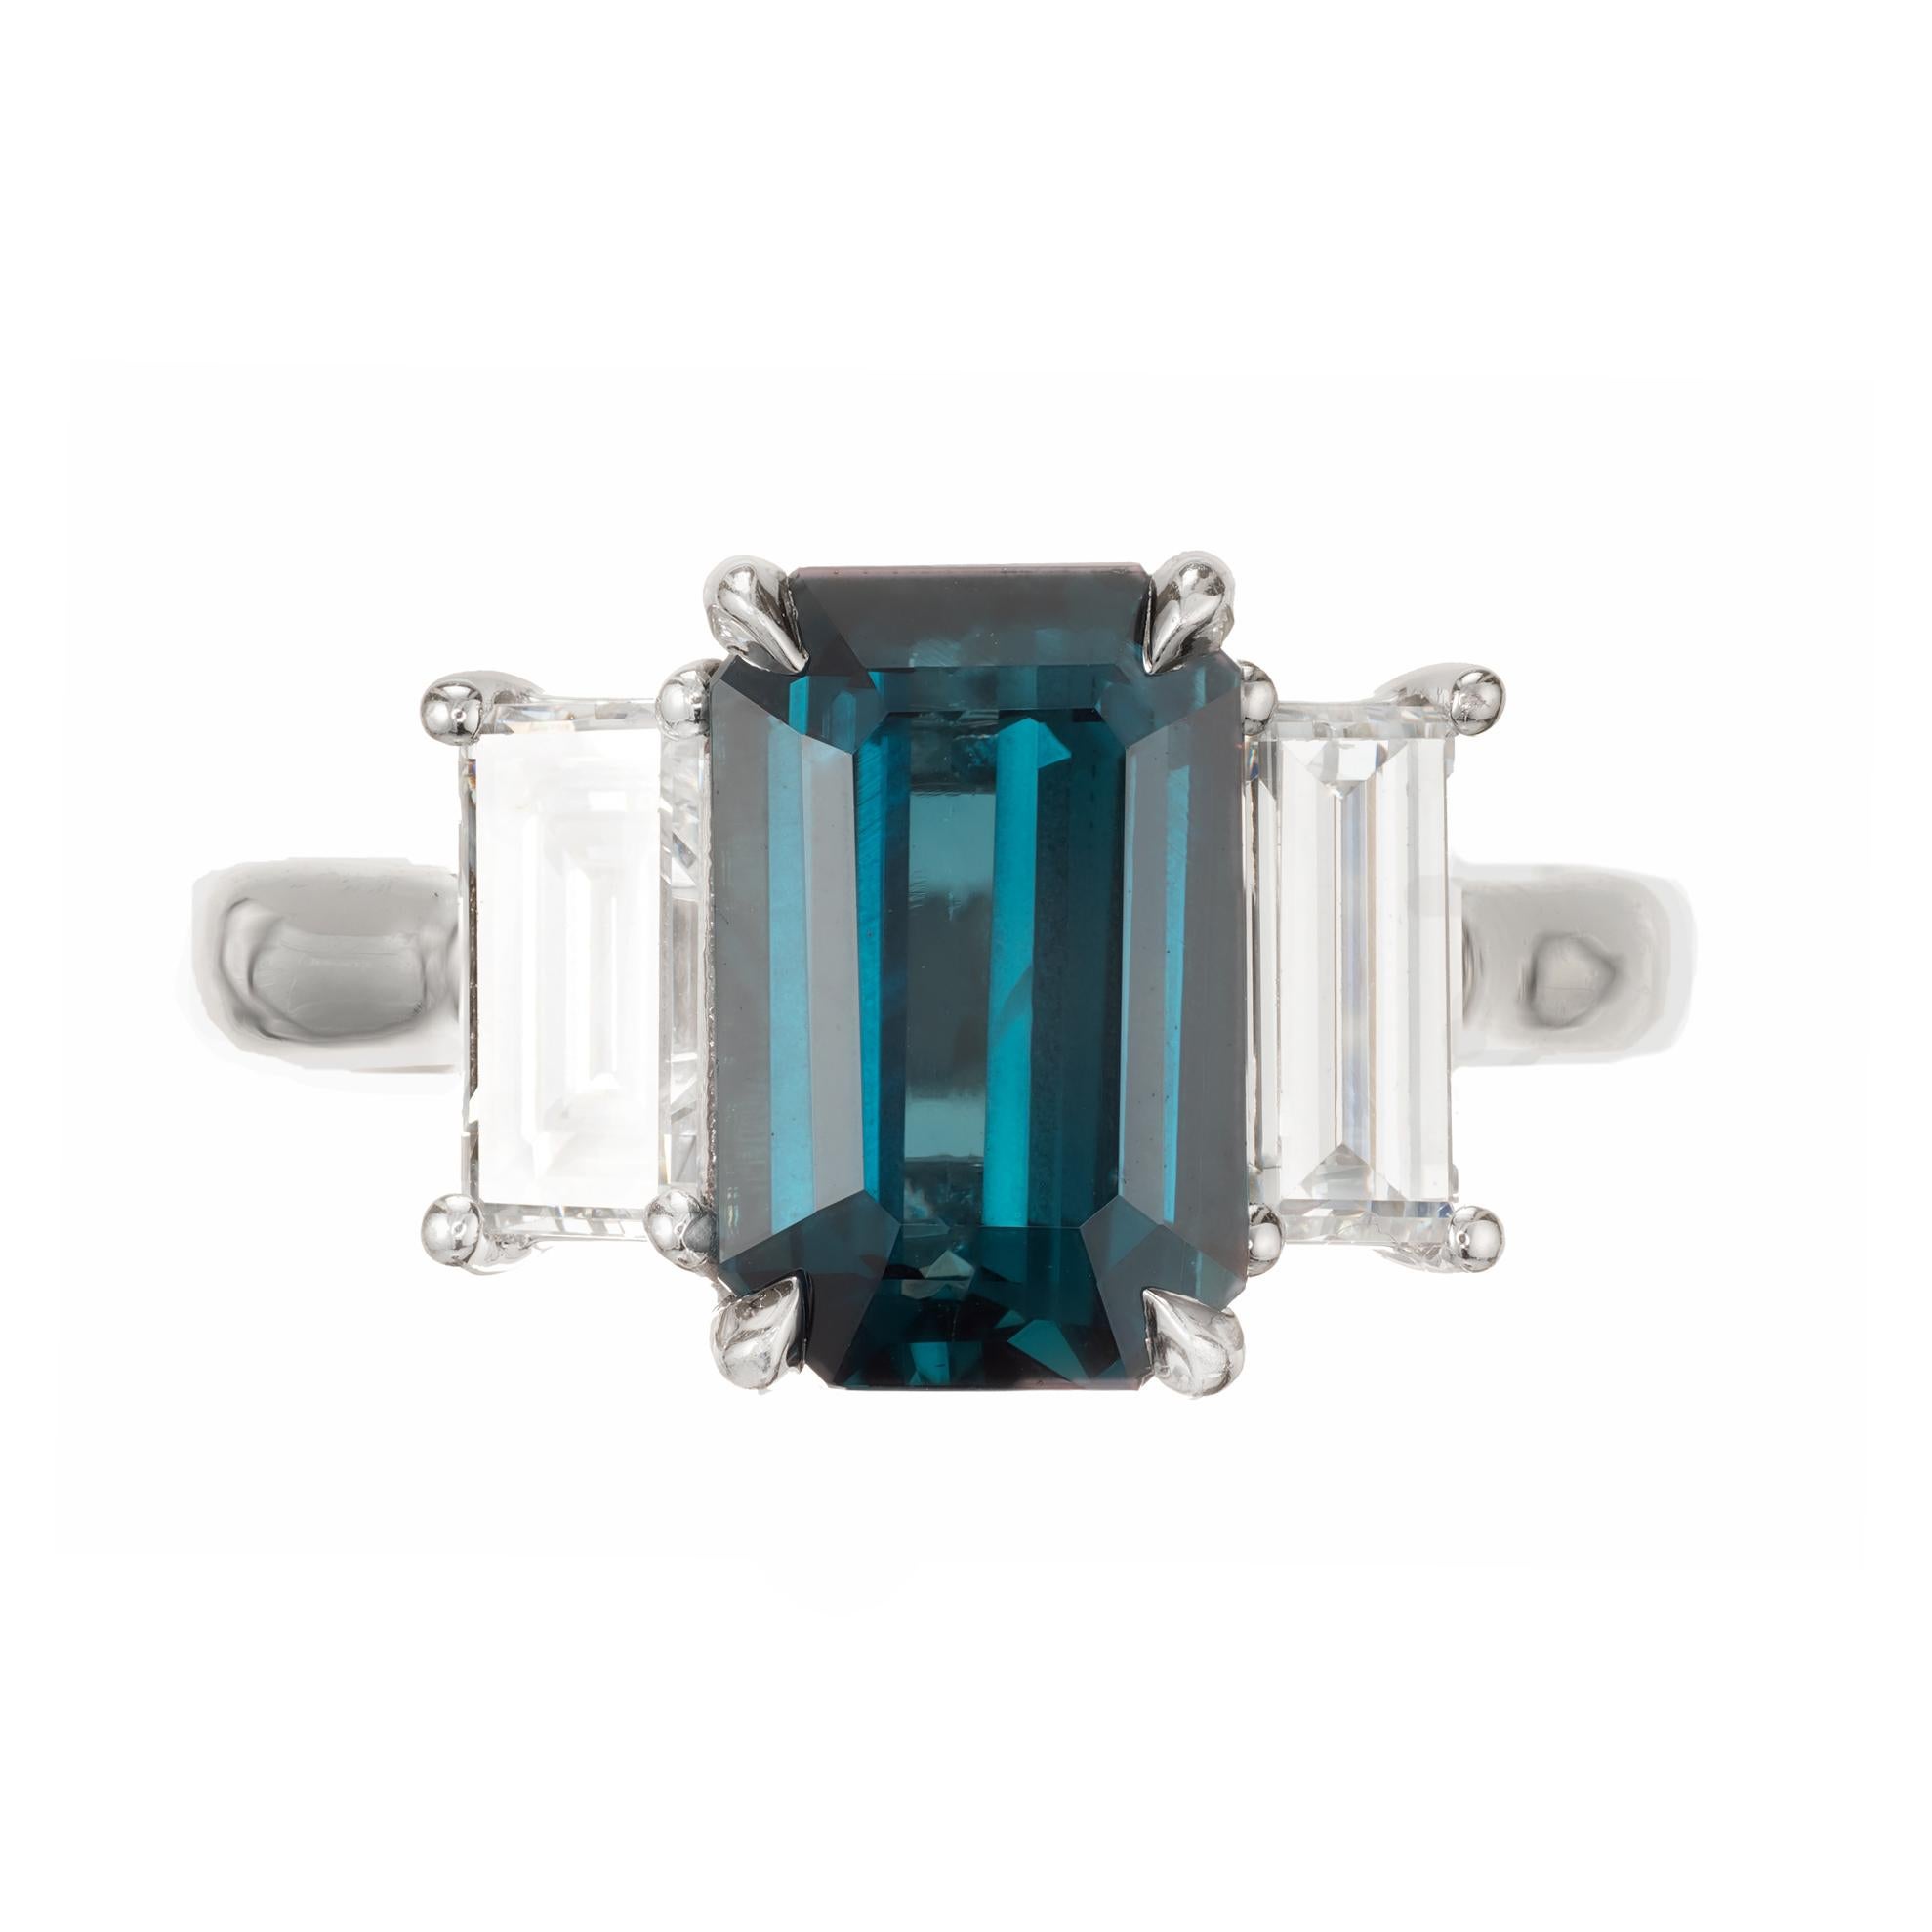 Peter Suchy Sapphire and diamond three stone platinum engagement ring. Made with elongated Emerald cut natural no heat Sapphire and diamonds in a low to the finger platinum setting. Designed in the Peter Suchy Workshop. 

1 octagonal step cut blue